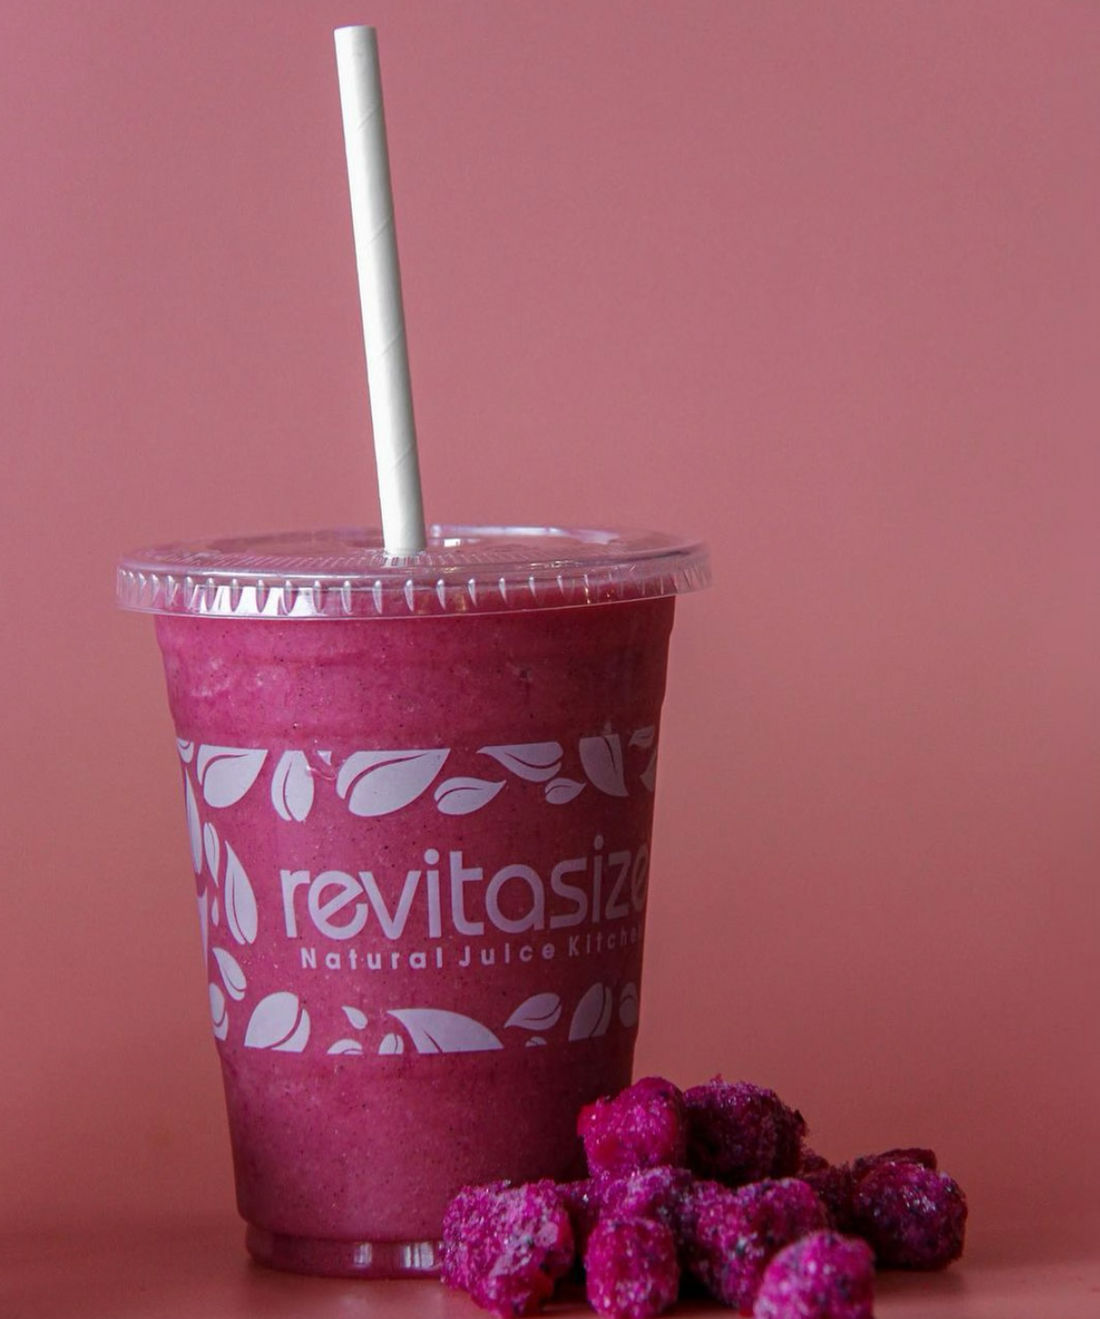 Revitasize's Love for Health: A Valentine's Day Gift Guide